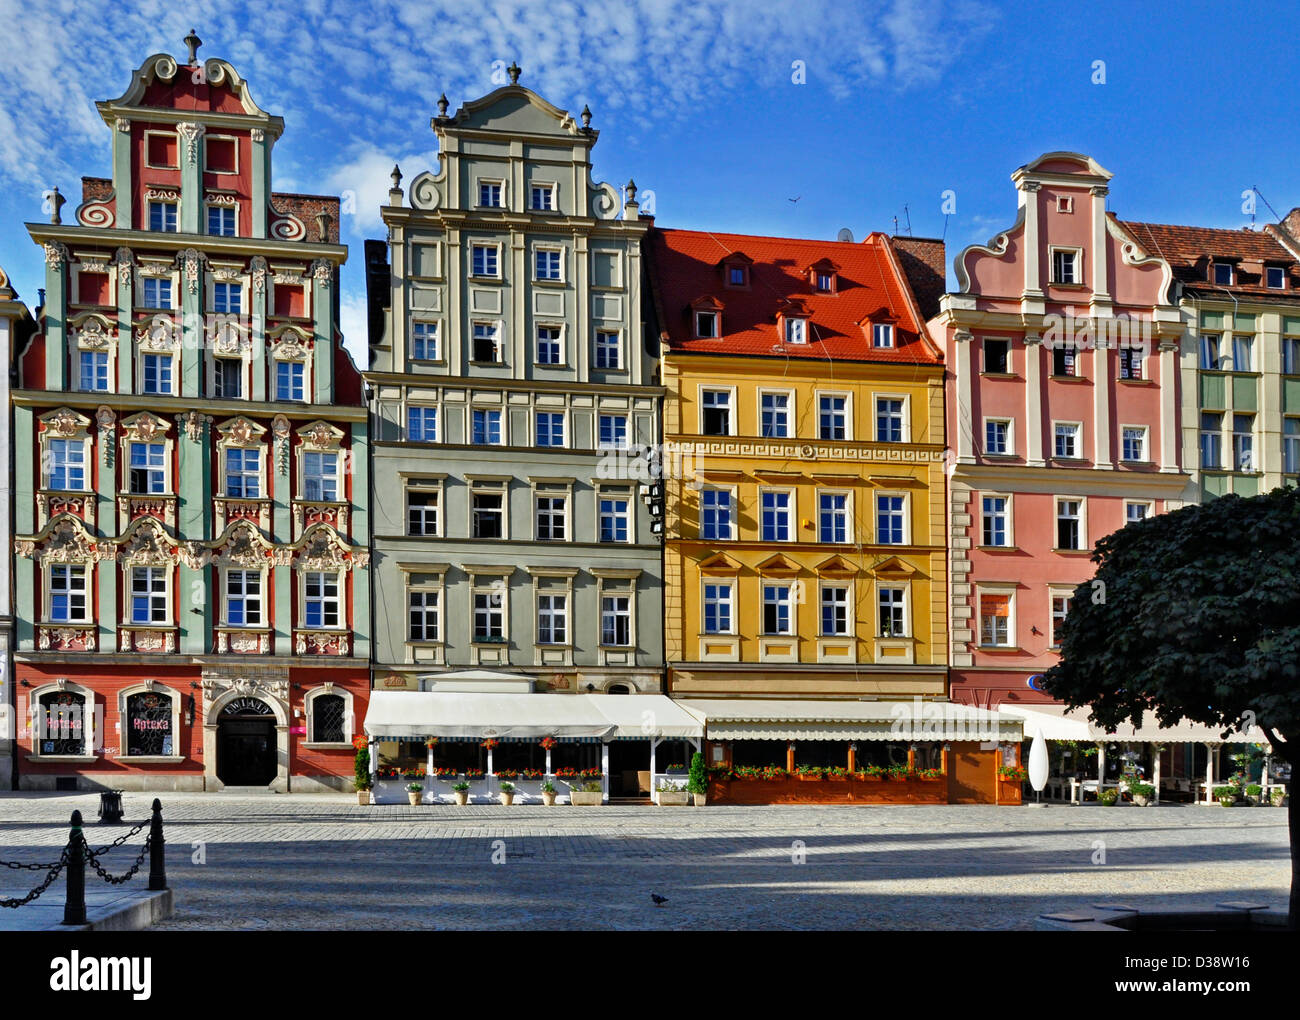 Facades of old historic tenements on Rynek (Market Square) in Wroclaw (Breslau), Poland Stock Photo